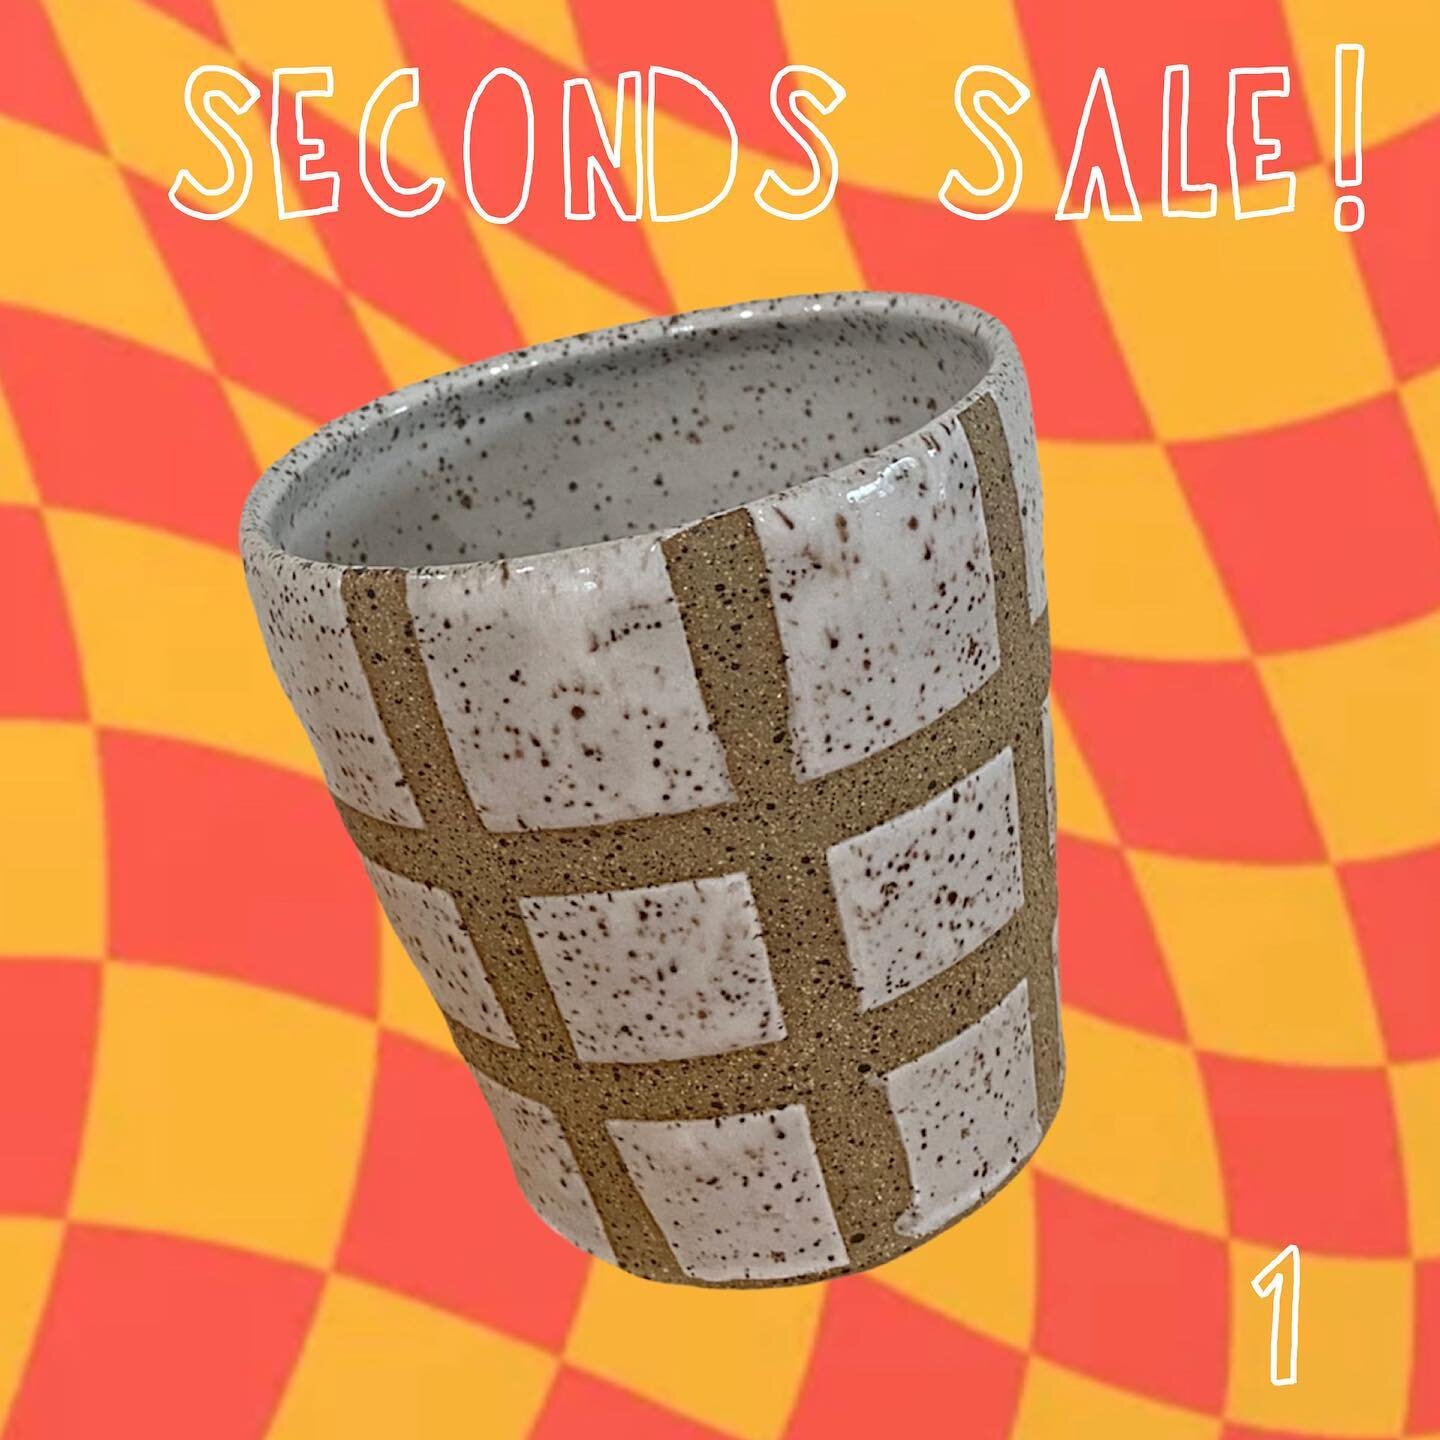 ☀️SECONDS SALE☀️ 

Nashville pickup only 🛒 

😛$12 each😛

My seconds are pieces that were either test pieces or have slight glaze imperfections or warping, but are still totally functional. 

DM to claim and then you can pay via venmo and we can se